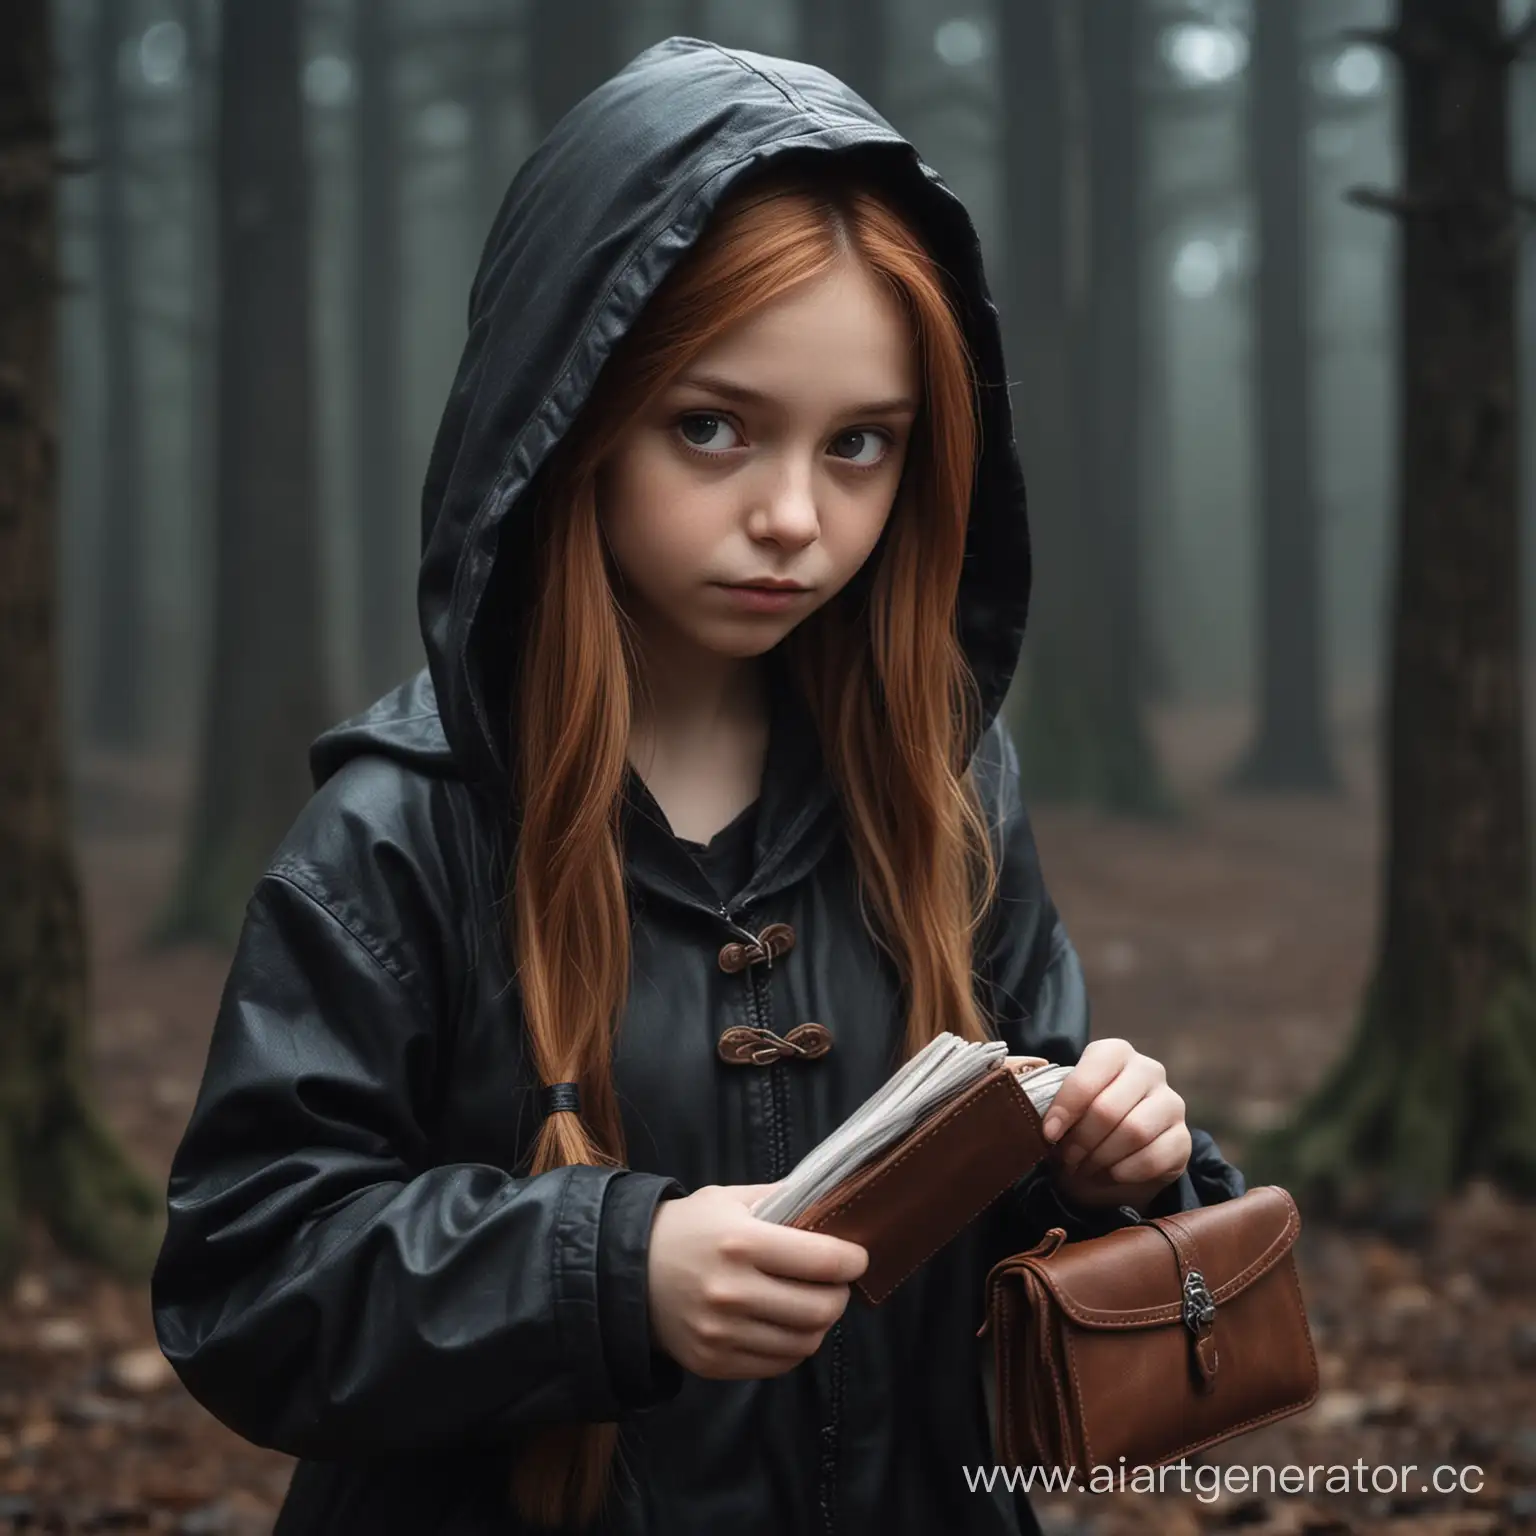 Gloomy-Fantasy-Scene-Hooded-Gnome-Girl-Stealing-a-Wallet